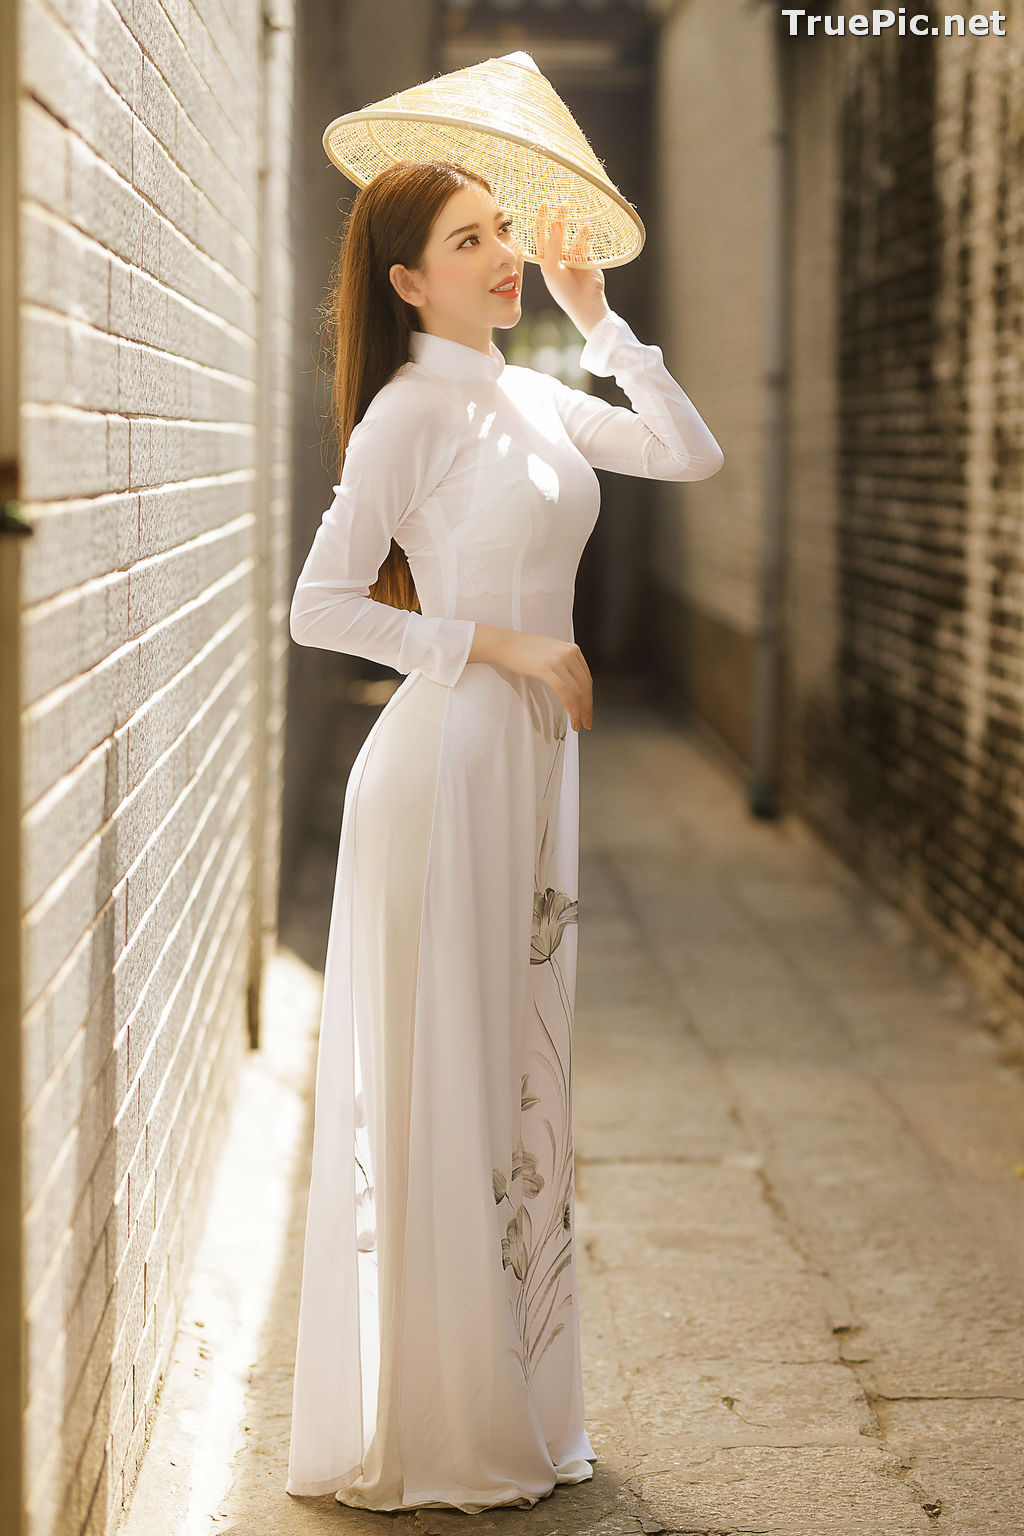 Image The Beauty of Vietnamese Girls with Traditional Dress (Ao Dai) #2 - TruePic.net - Picture-59